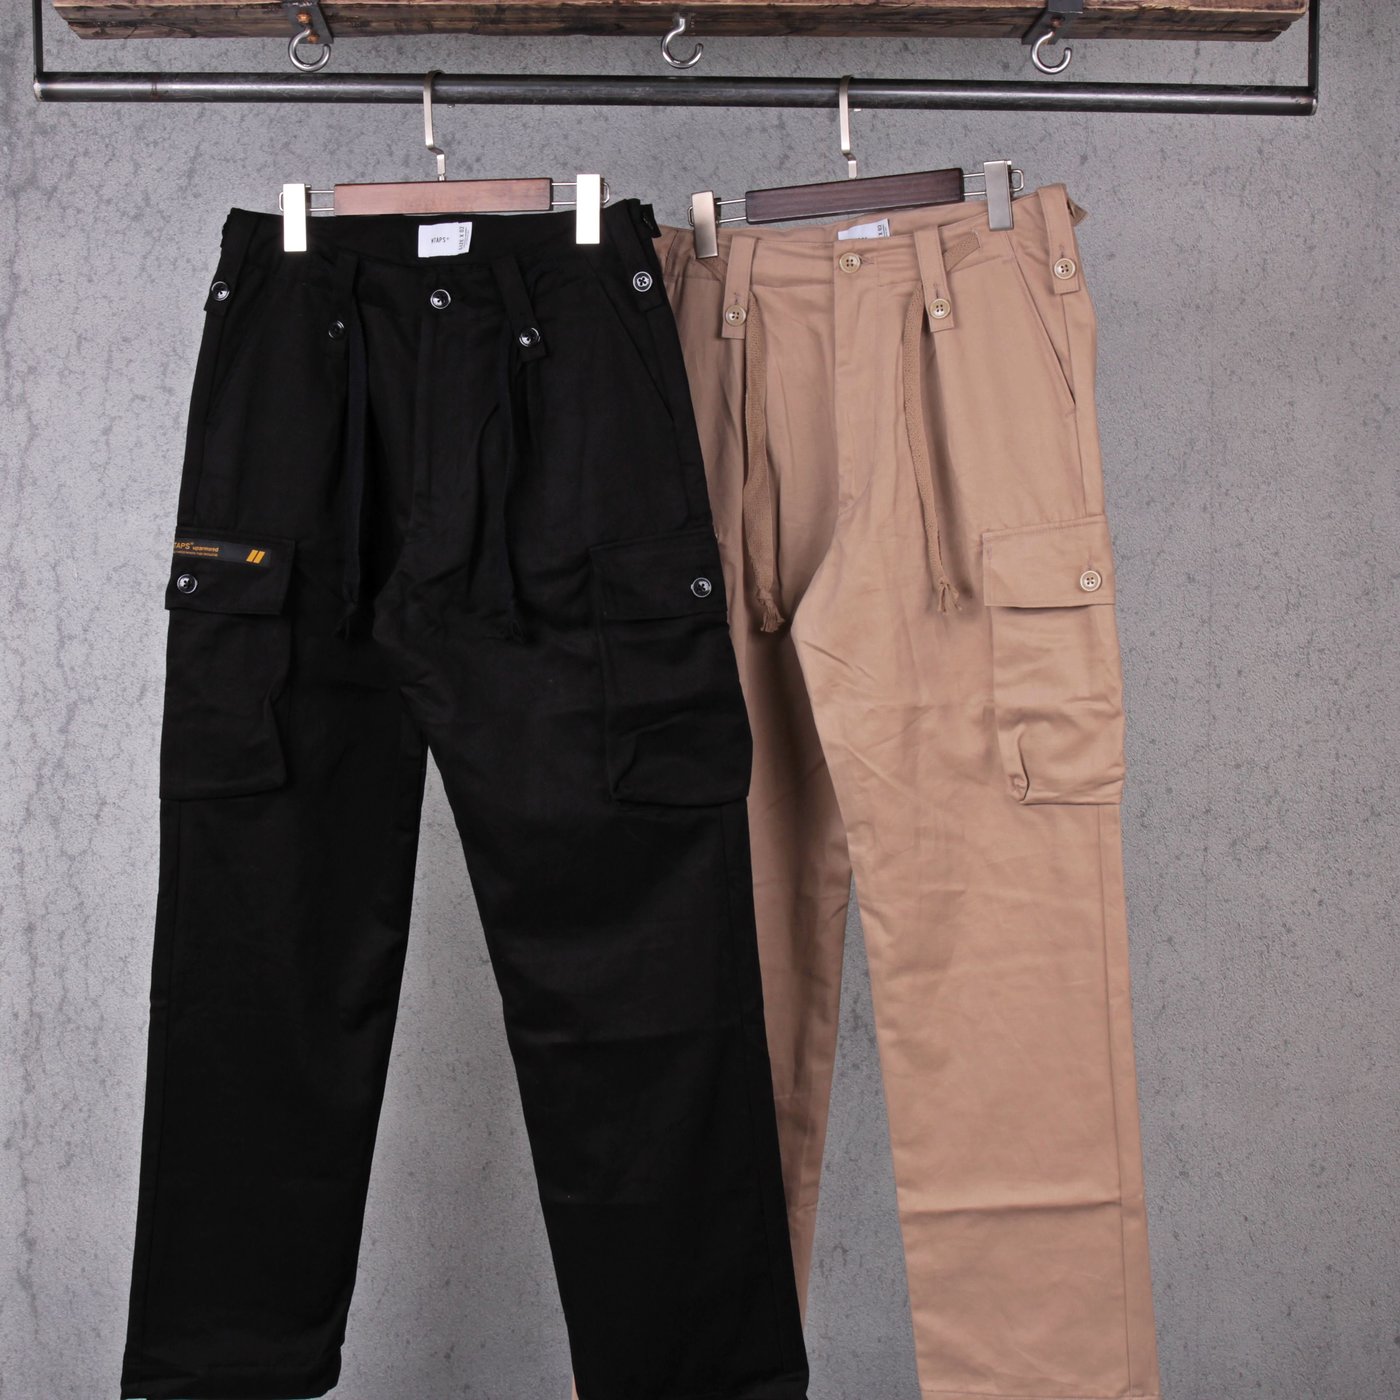 HYDRA】Wtaps Jungle Country Trousers / Cotton 工作褲口袋